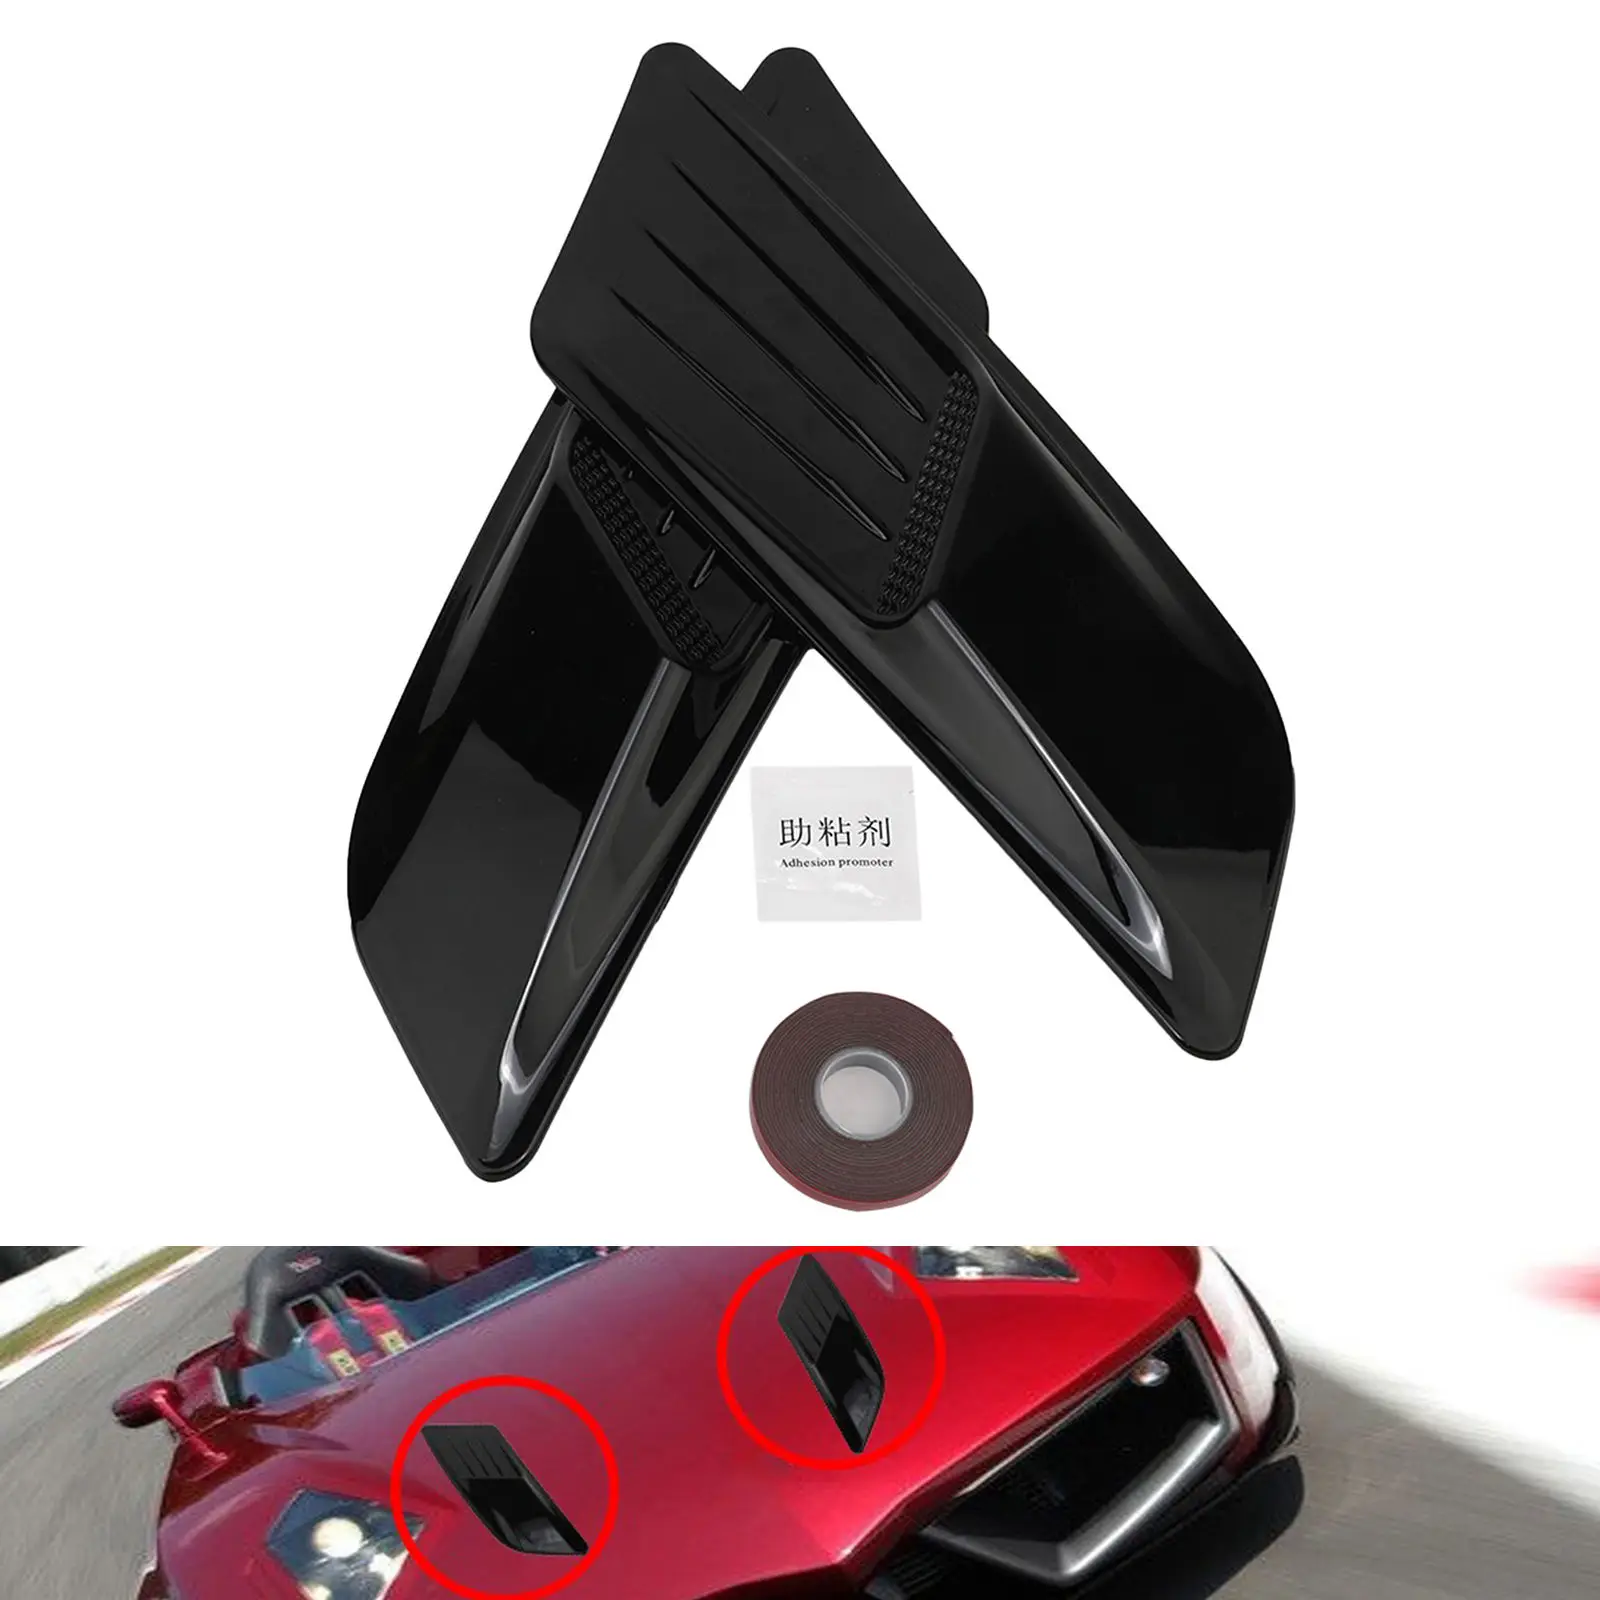 Set of 2 Automobile Left Right Front Hood Air Vent Molding Cover Decoration with Adhesive Tape